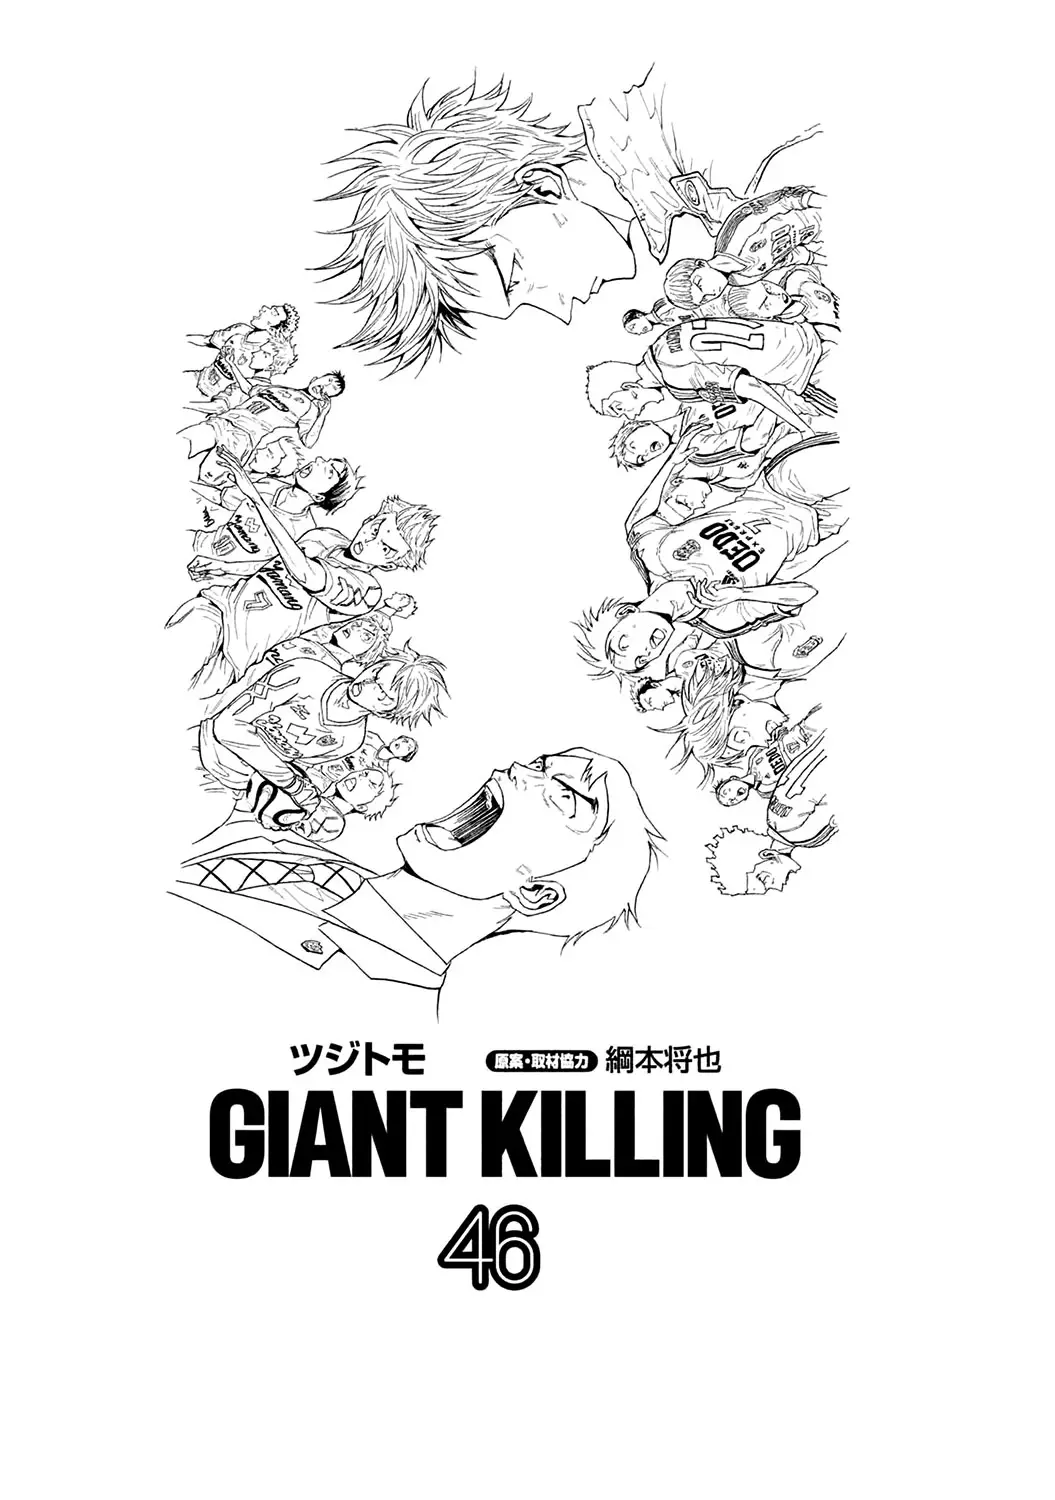 Giant Killing - 448 page 2-182507ff